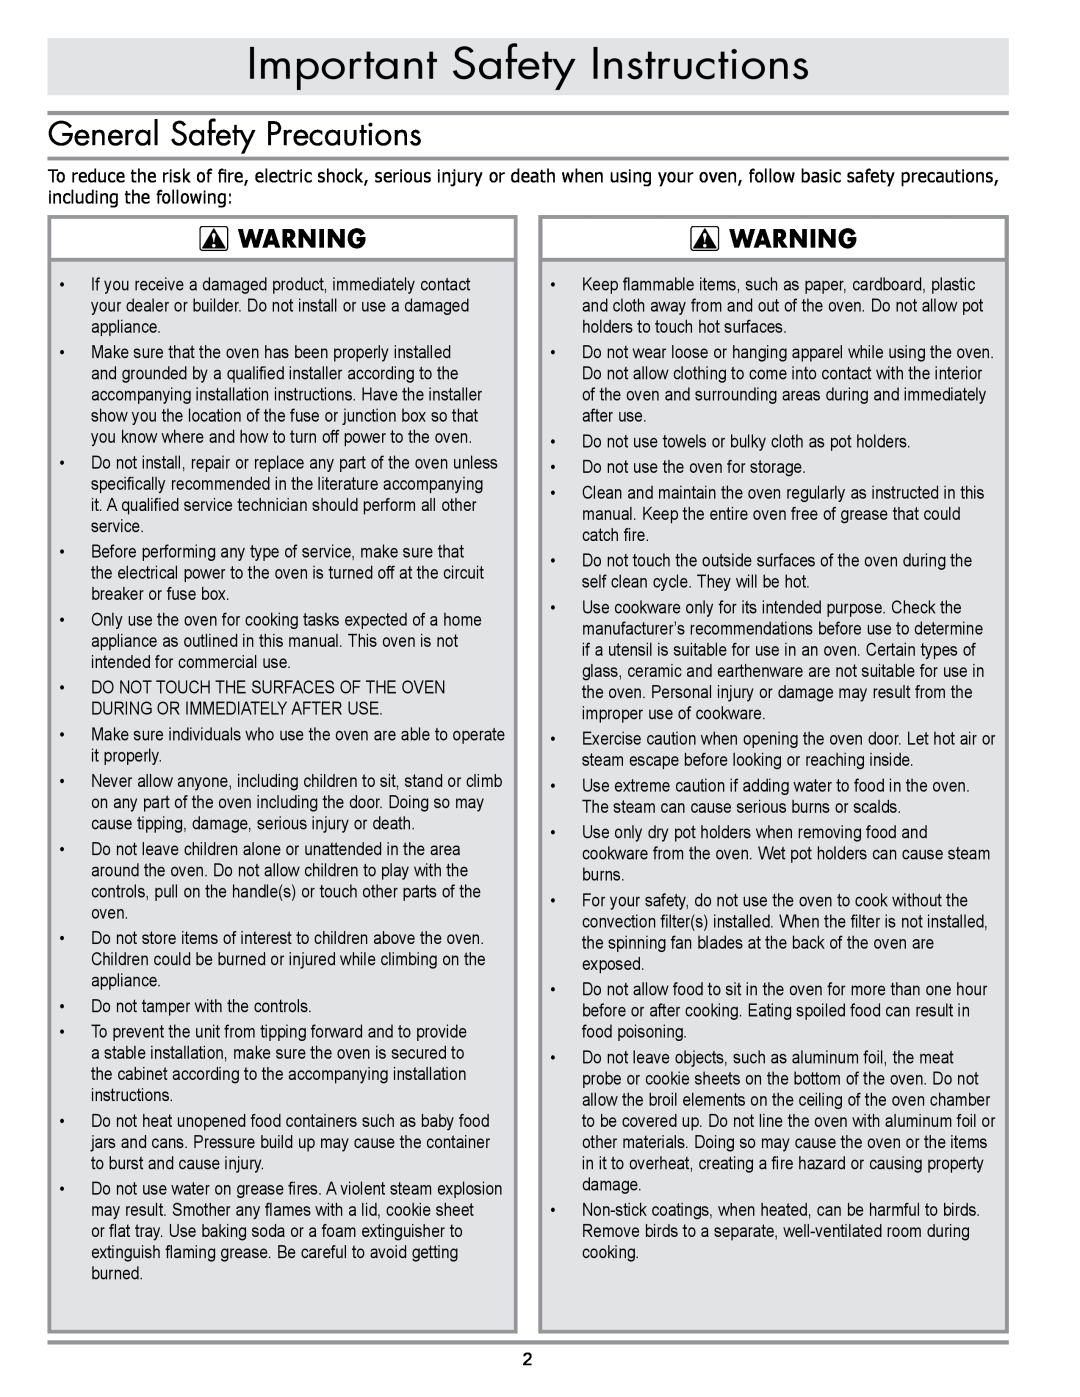 Sears EORD230 manual General Safety Precautions, Important Safety Instructions 